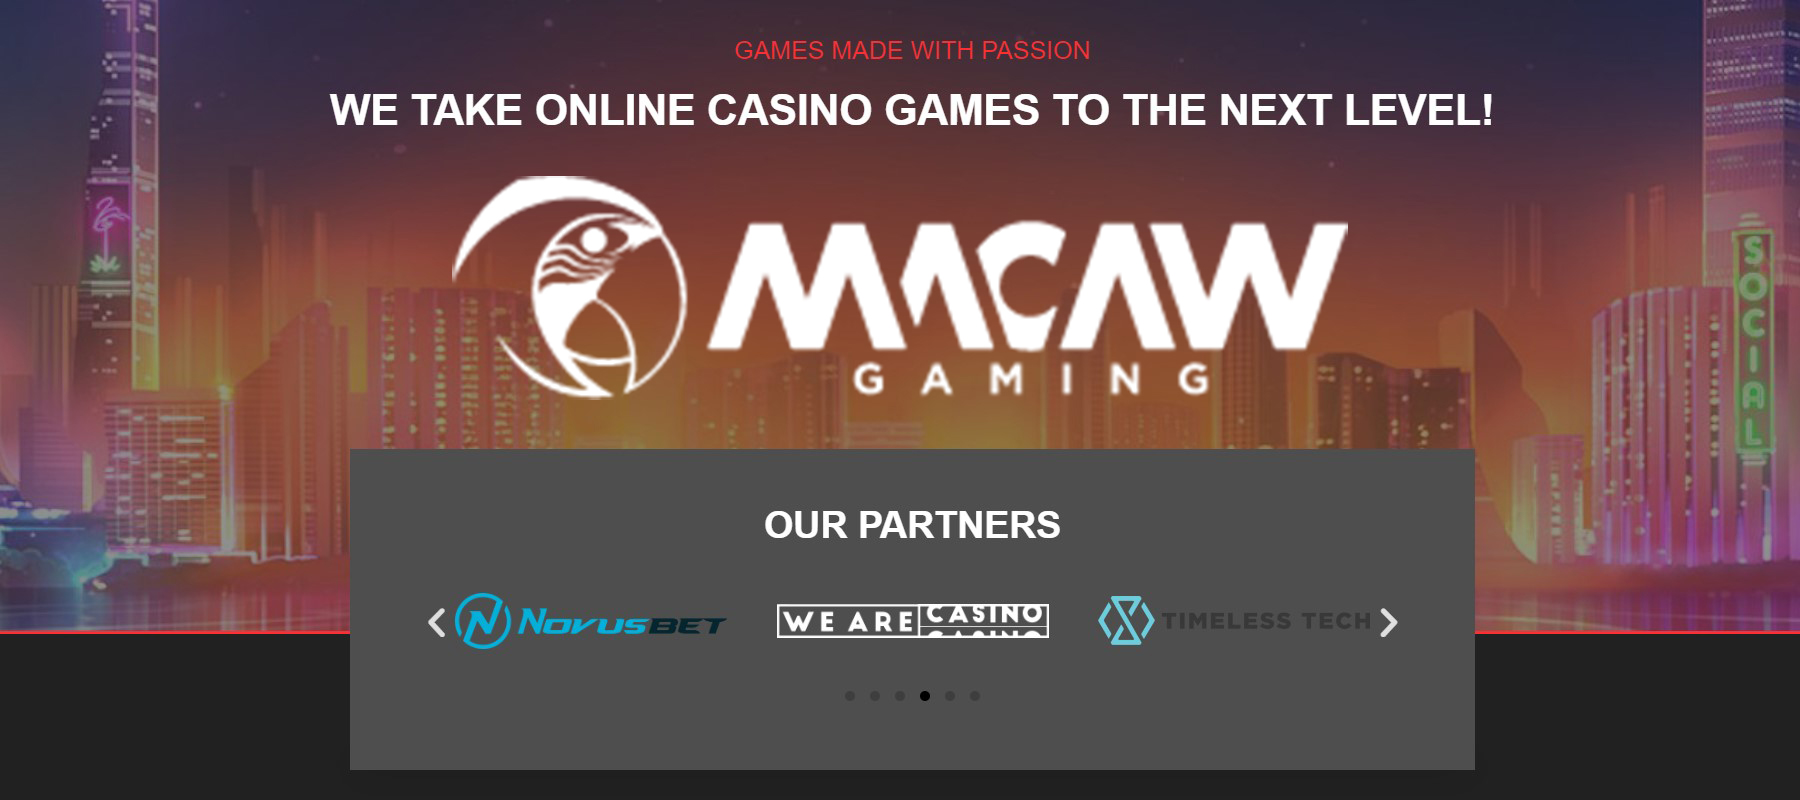 Macaw Gaming Partners